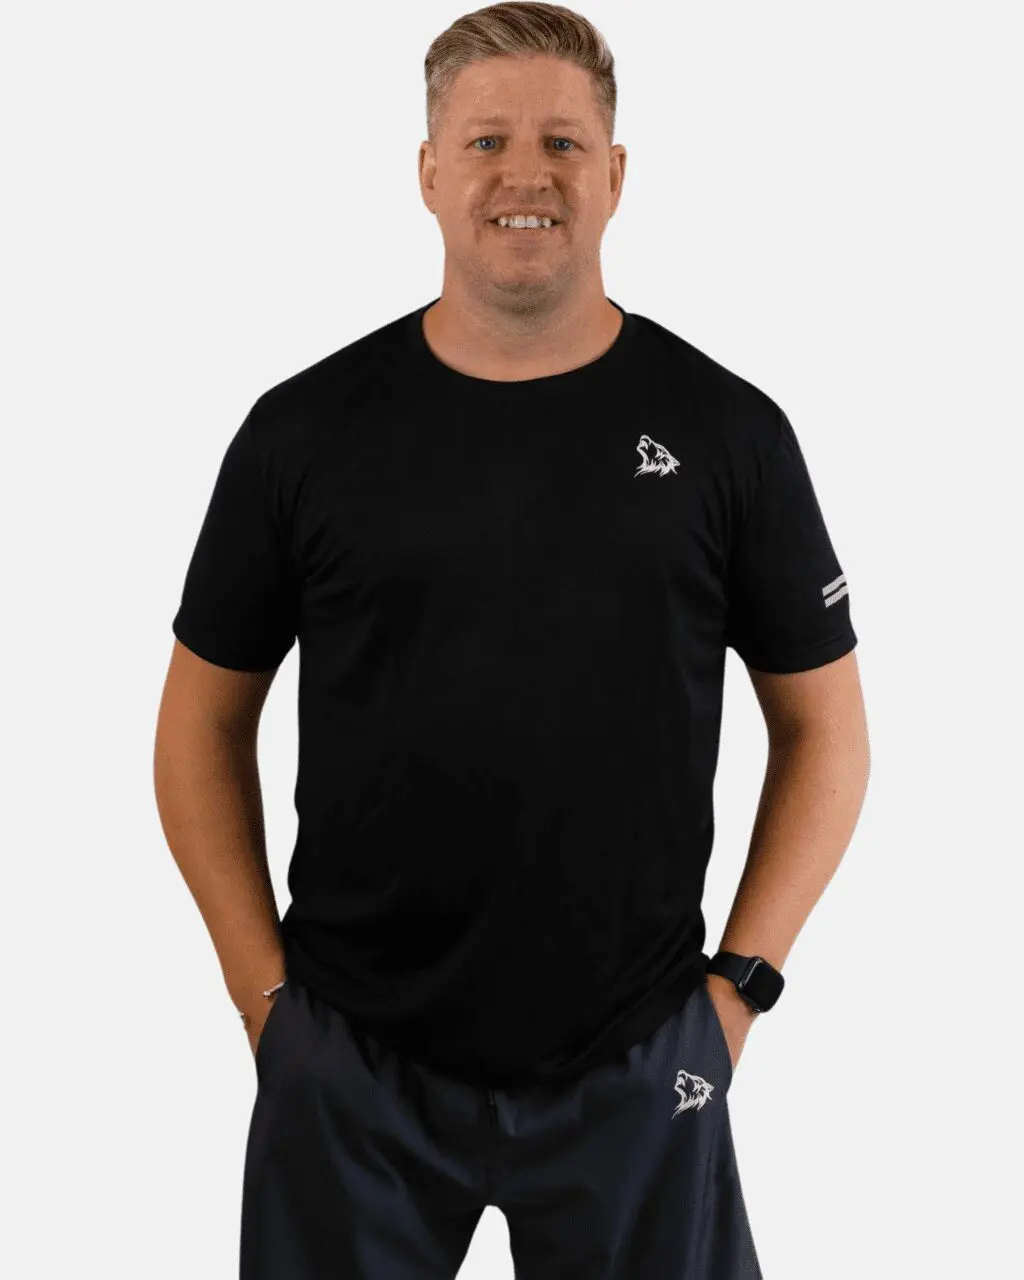 A man wearing black shirt and shorts standing with hands in his pockets.